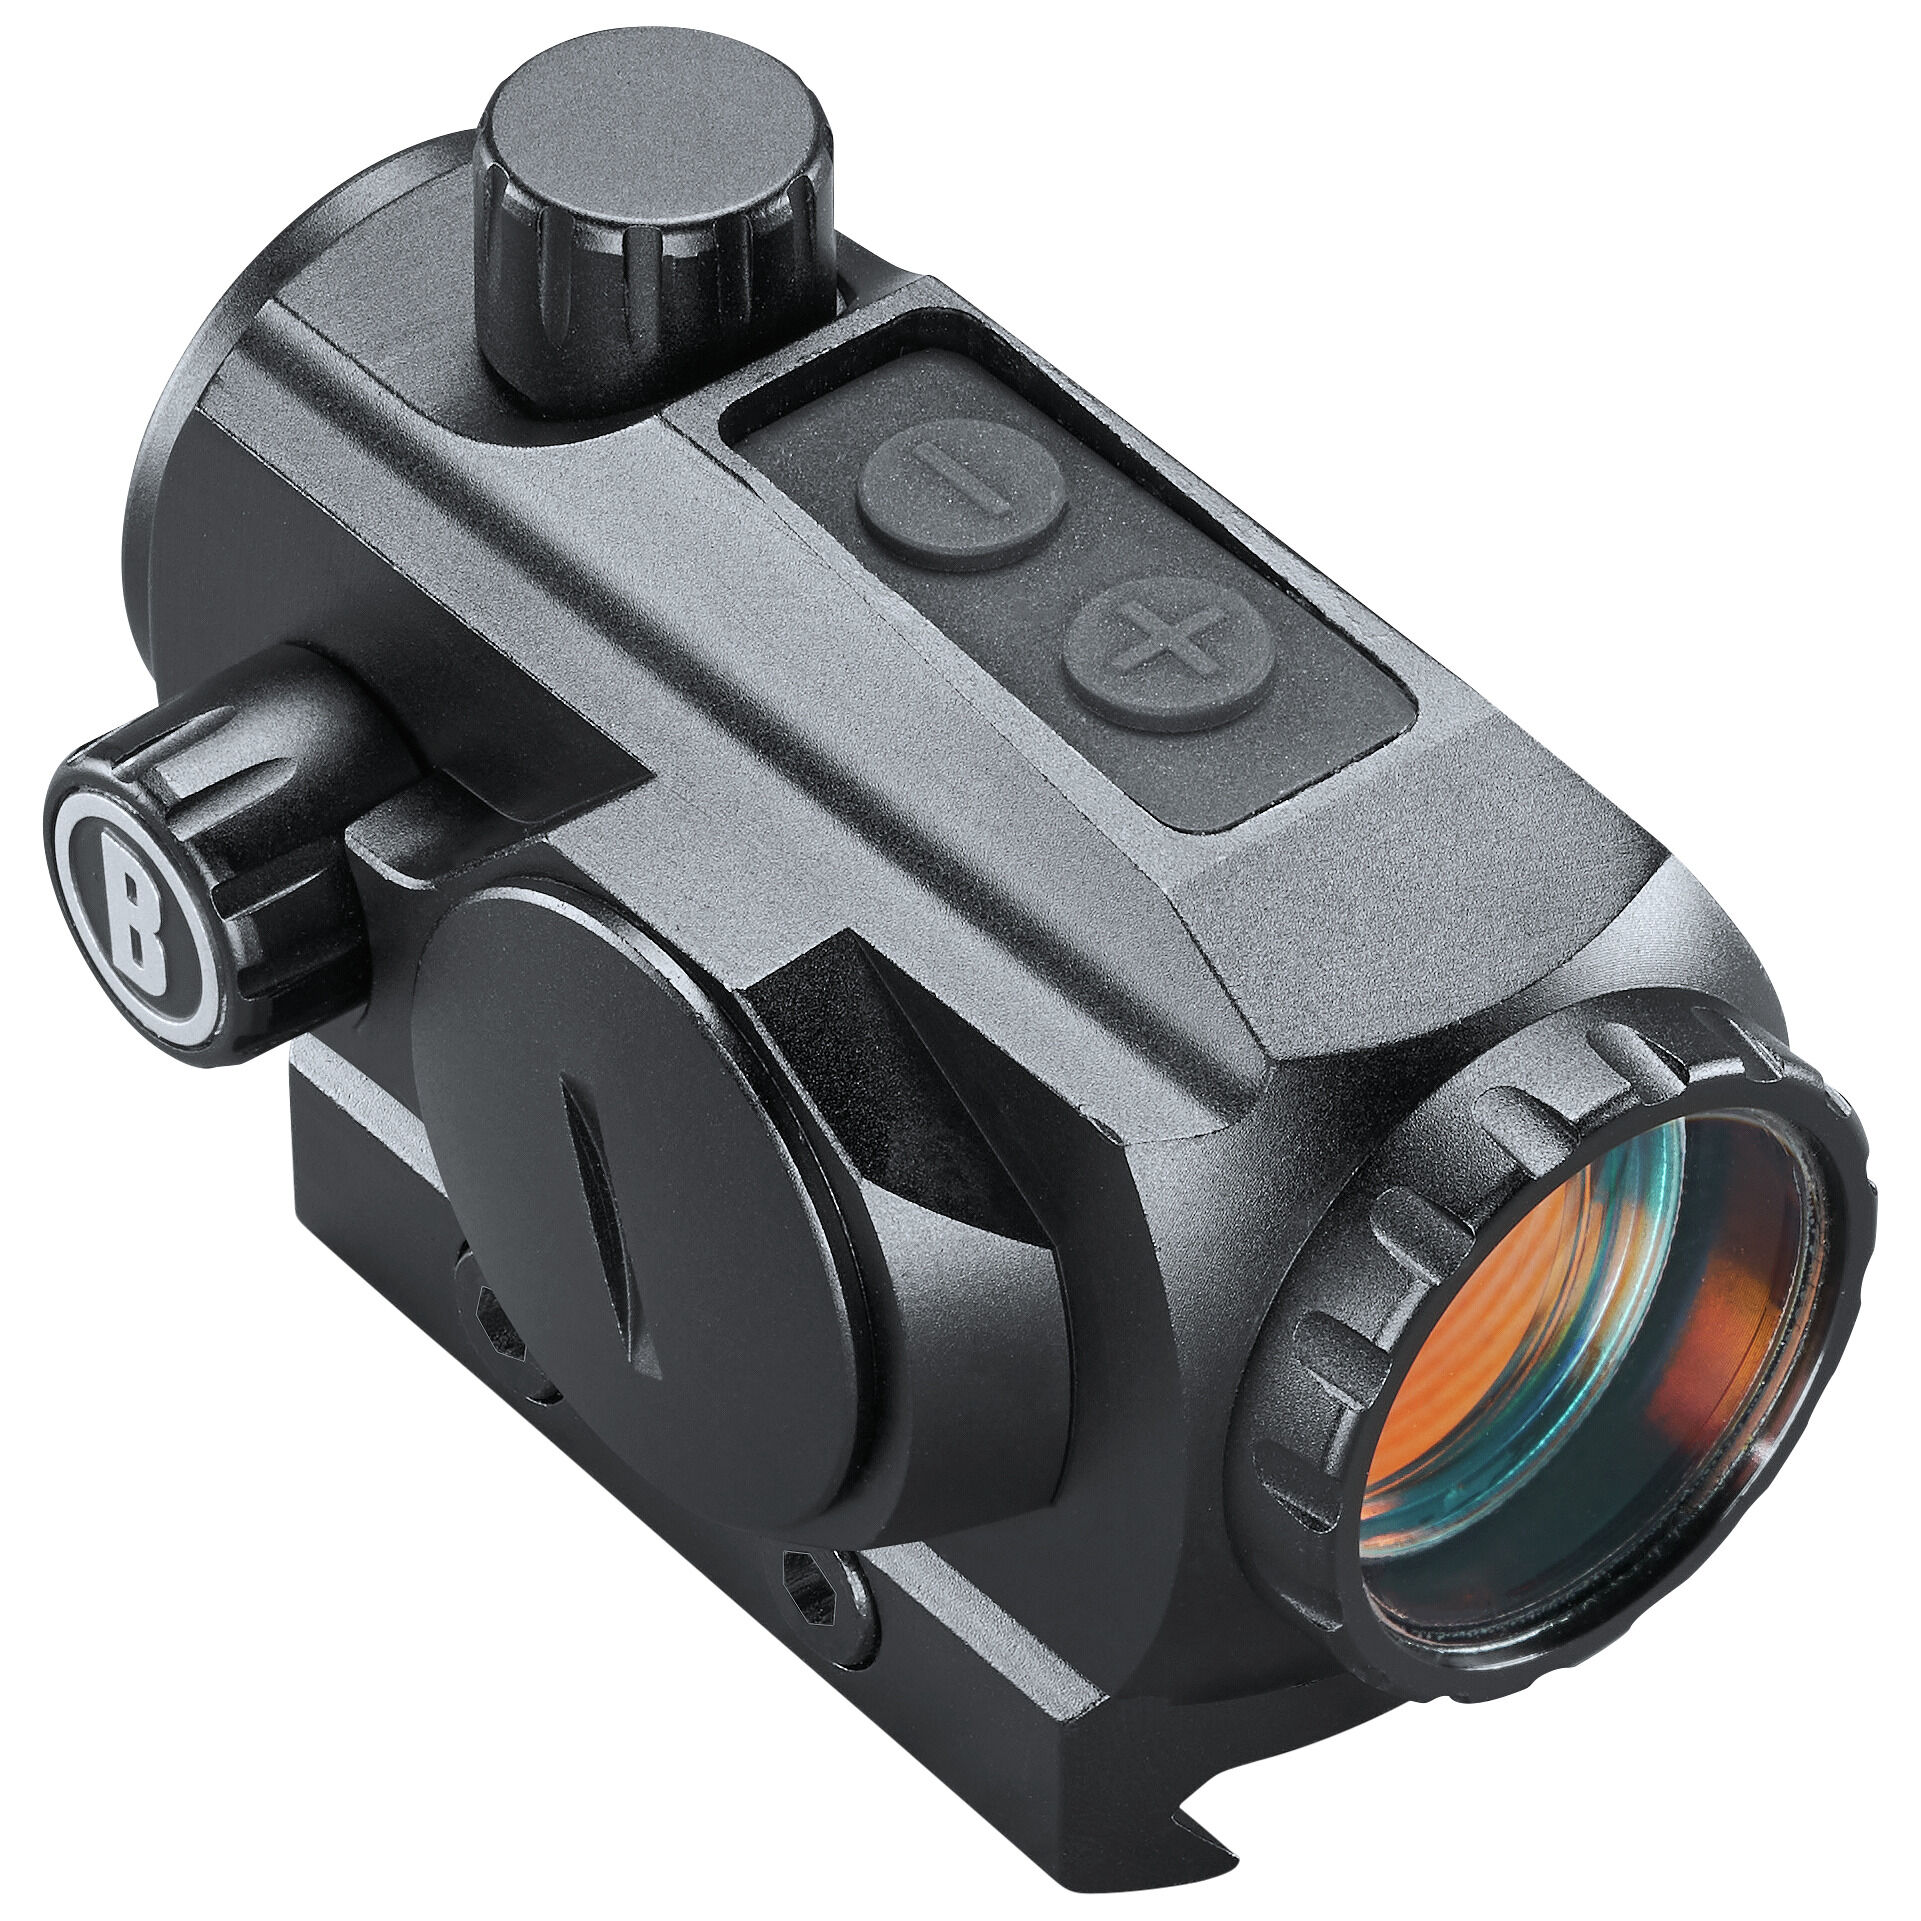 Shop All Red Dots Optic Equipment and More. Shop Today For All of 